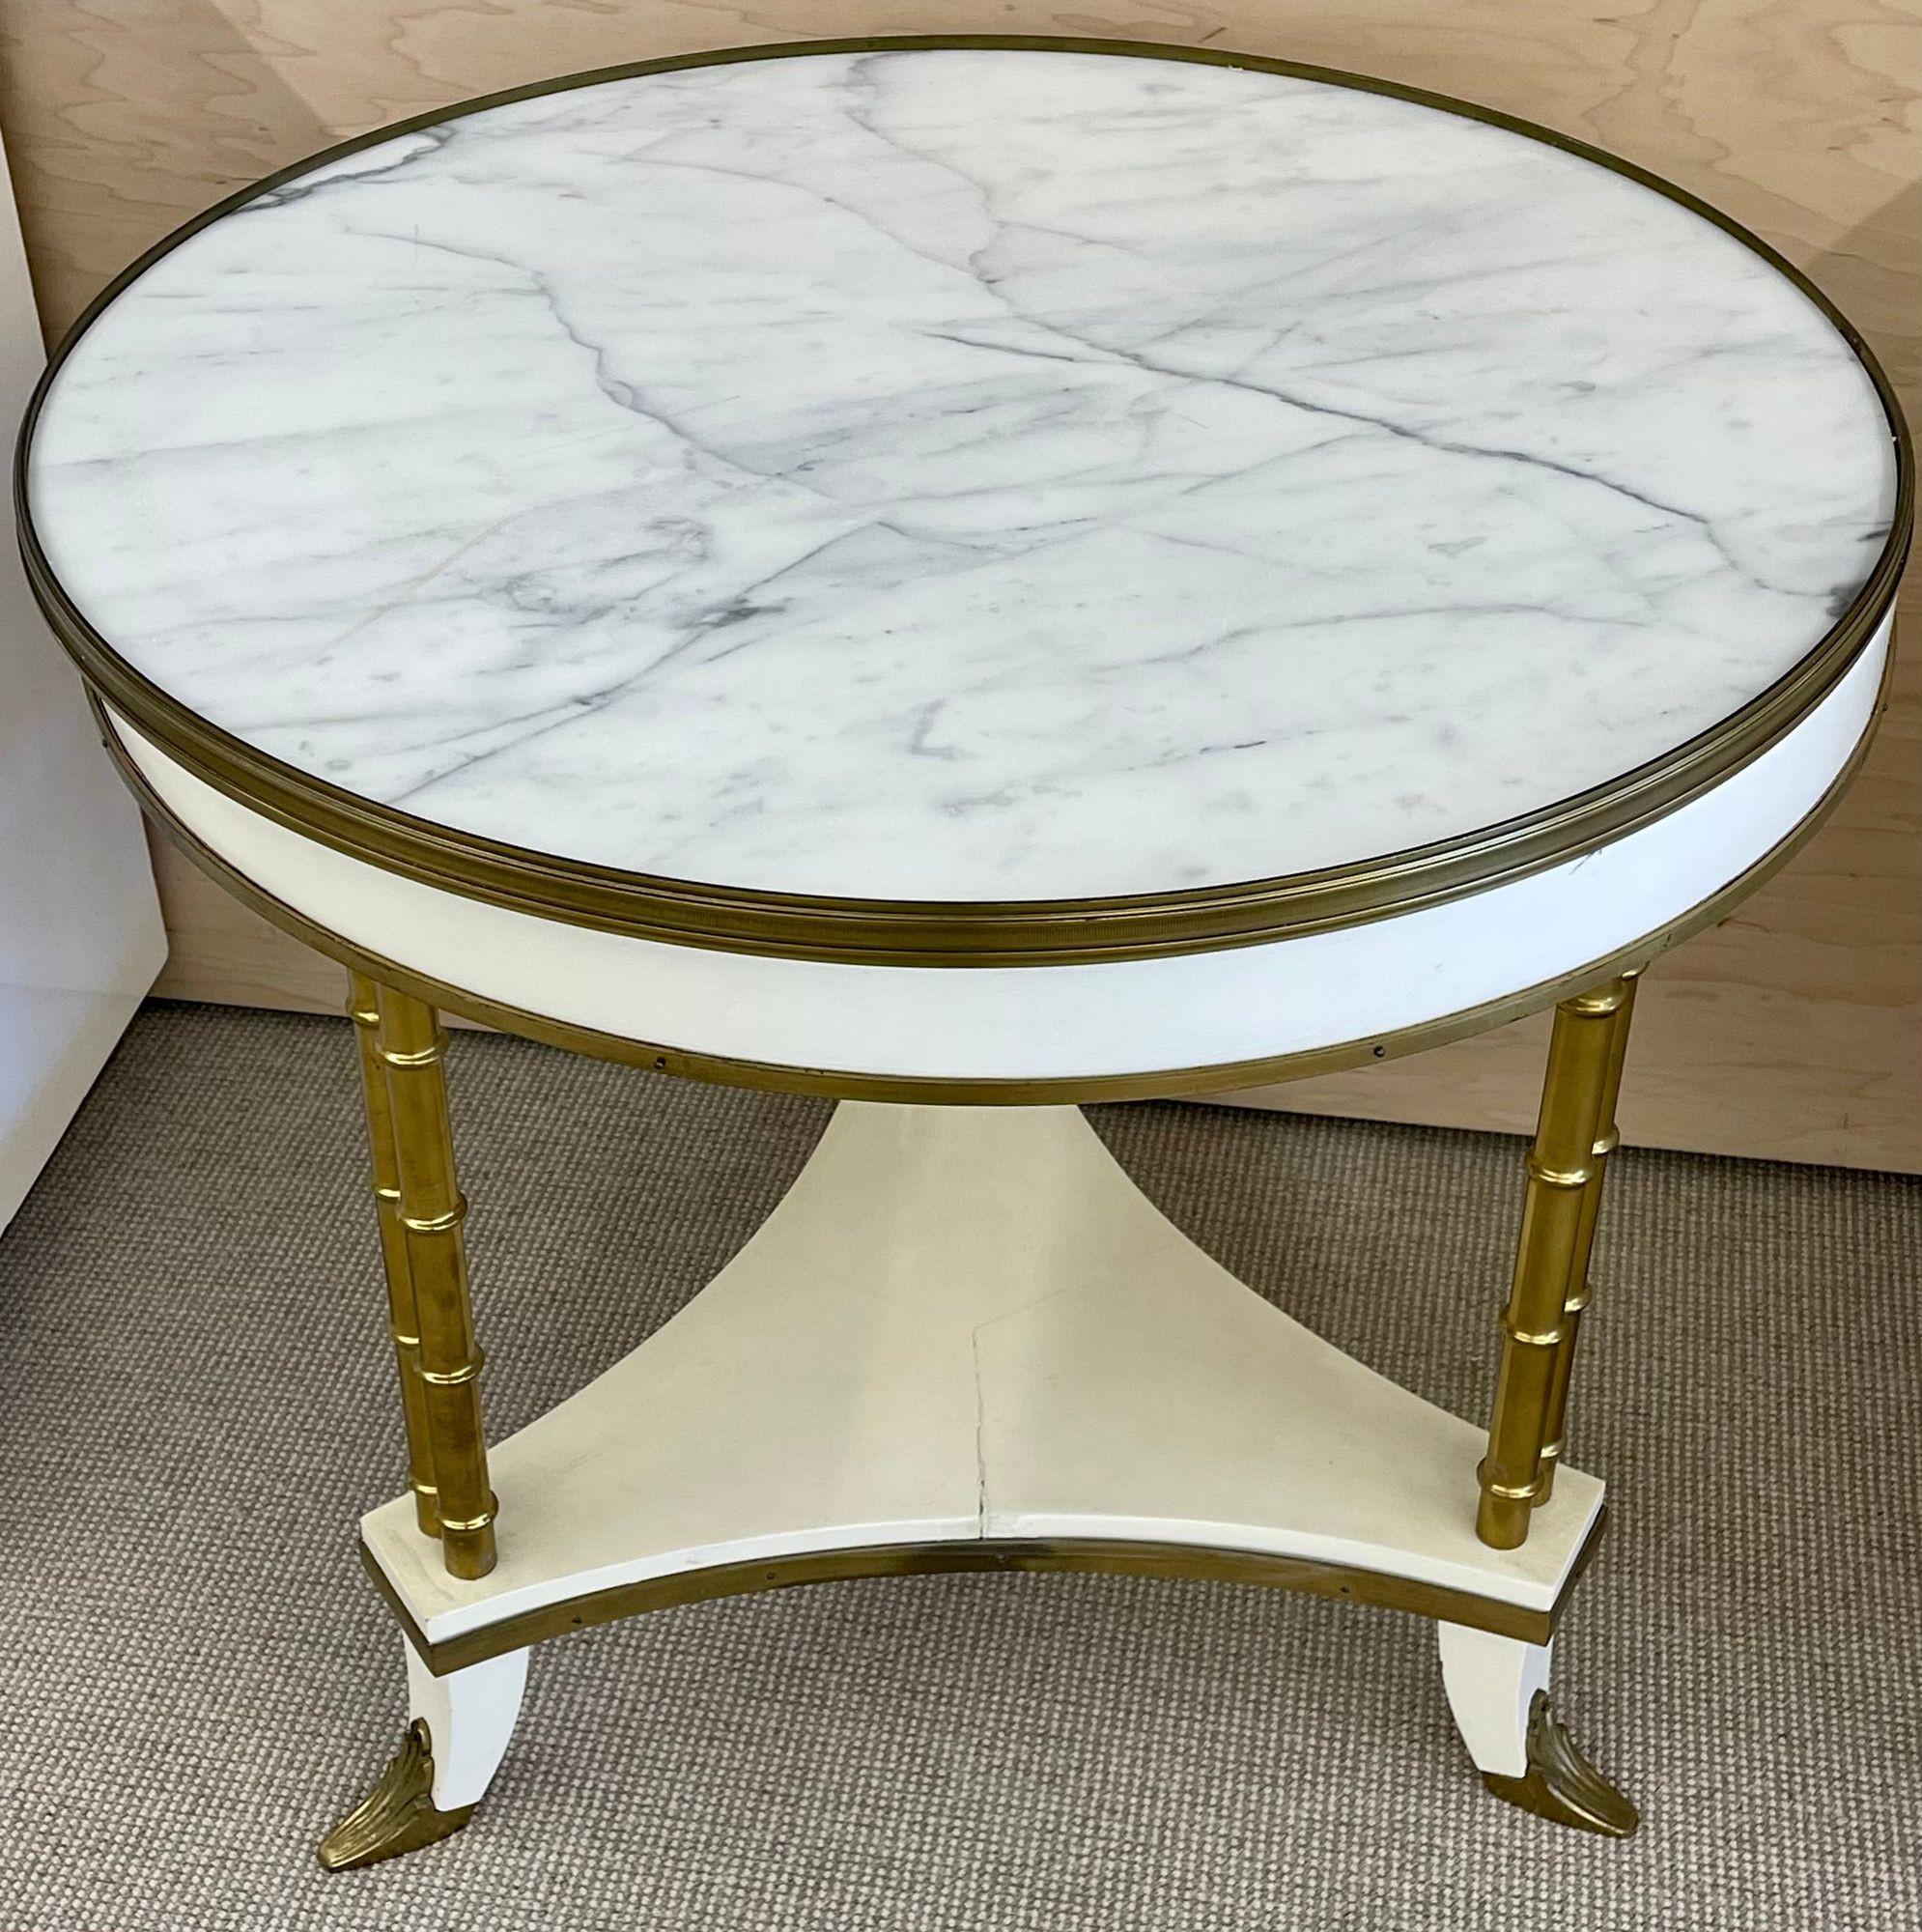 Hollywood Regency White Lacquered Brass Mounted Marble Top Bouilliote Table Style of Maison Jansen For Sale